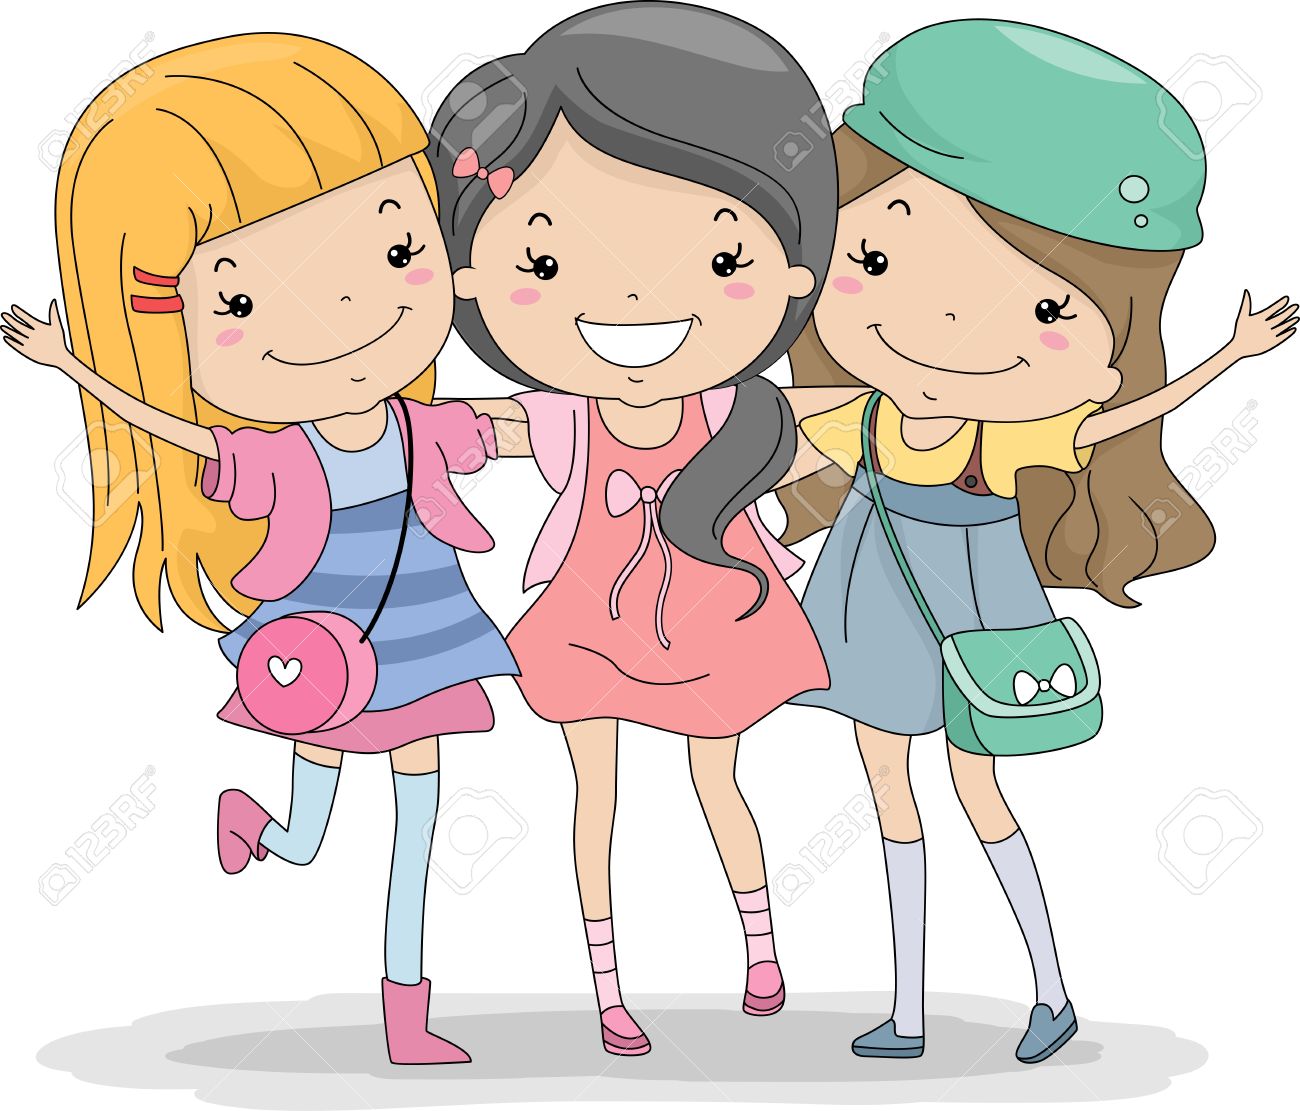 Three Best Friends Pictures Cartoon - Friends Cute Group Girl Drawn ...